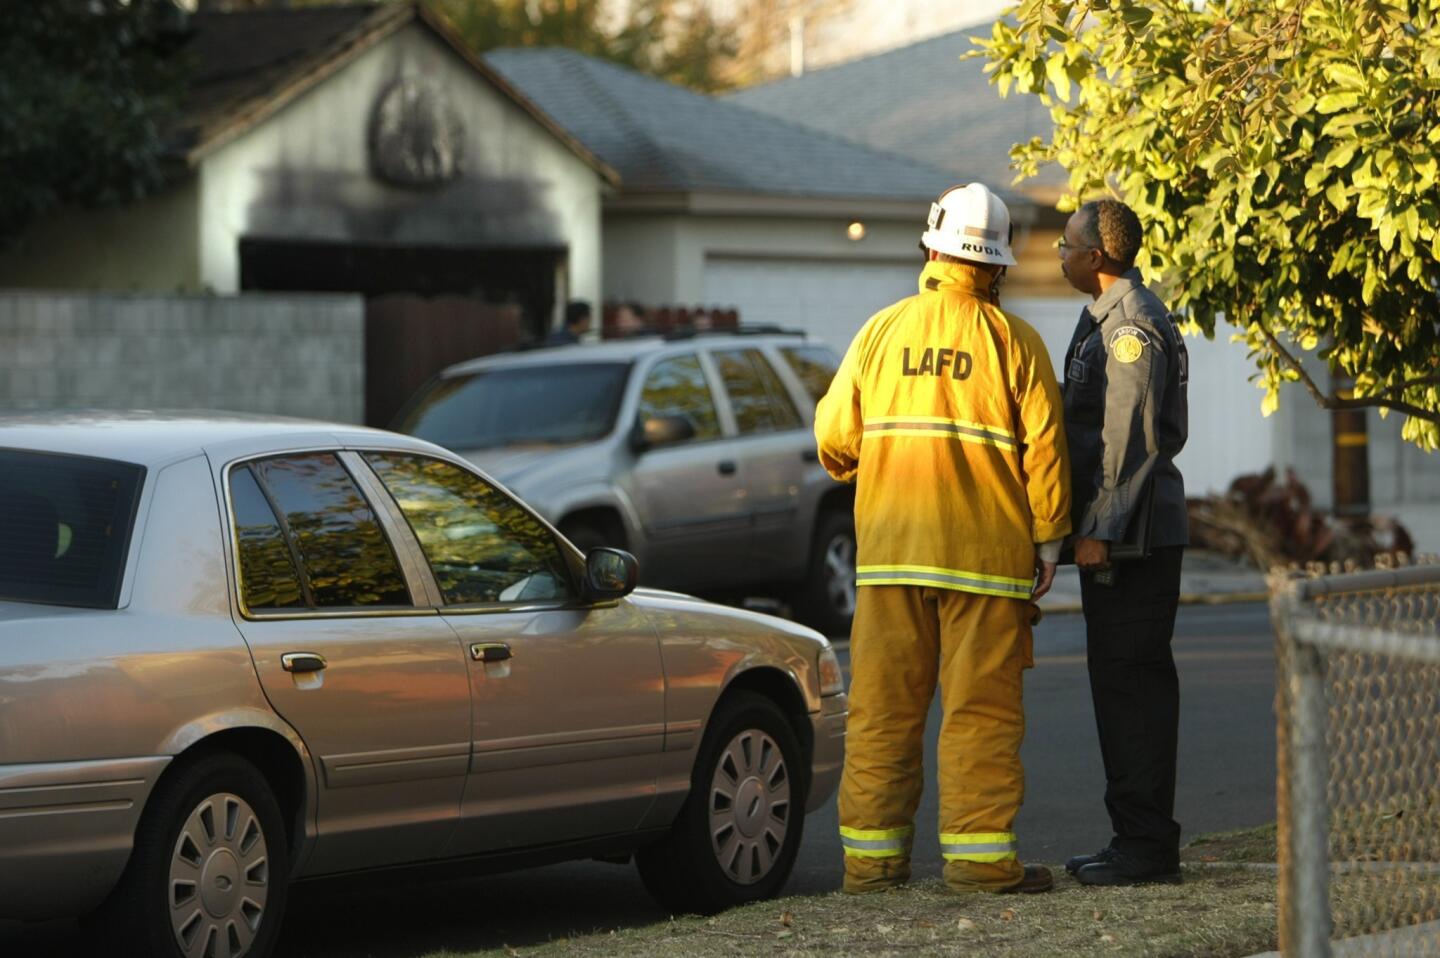 Firefighters responded about 4 a.m. to a report of a fire at a single-story home in the 7900 block of Sunnybrae Avenue, officials said. When they arrived at the home, they found a detached car garage engulfed in flames and heavy smoke.